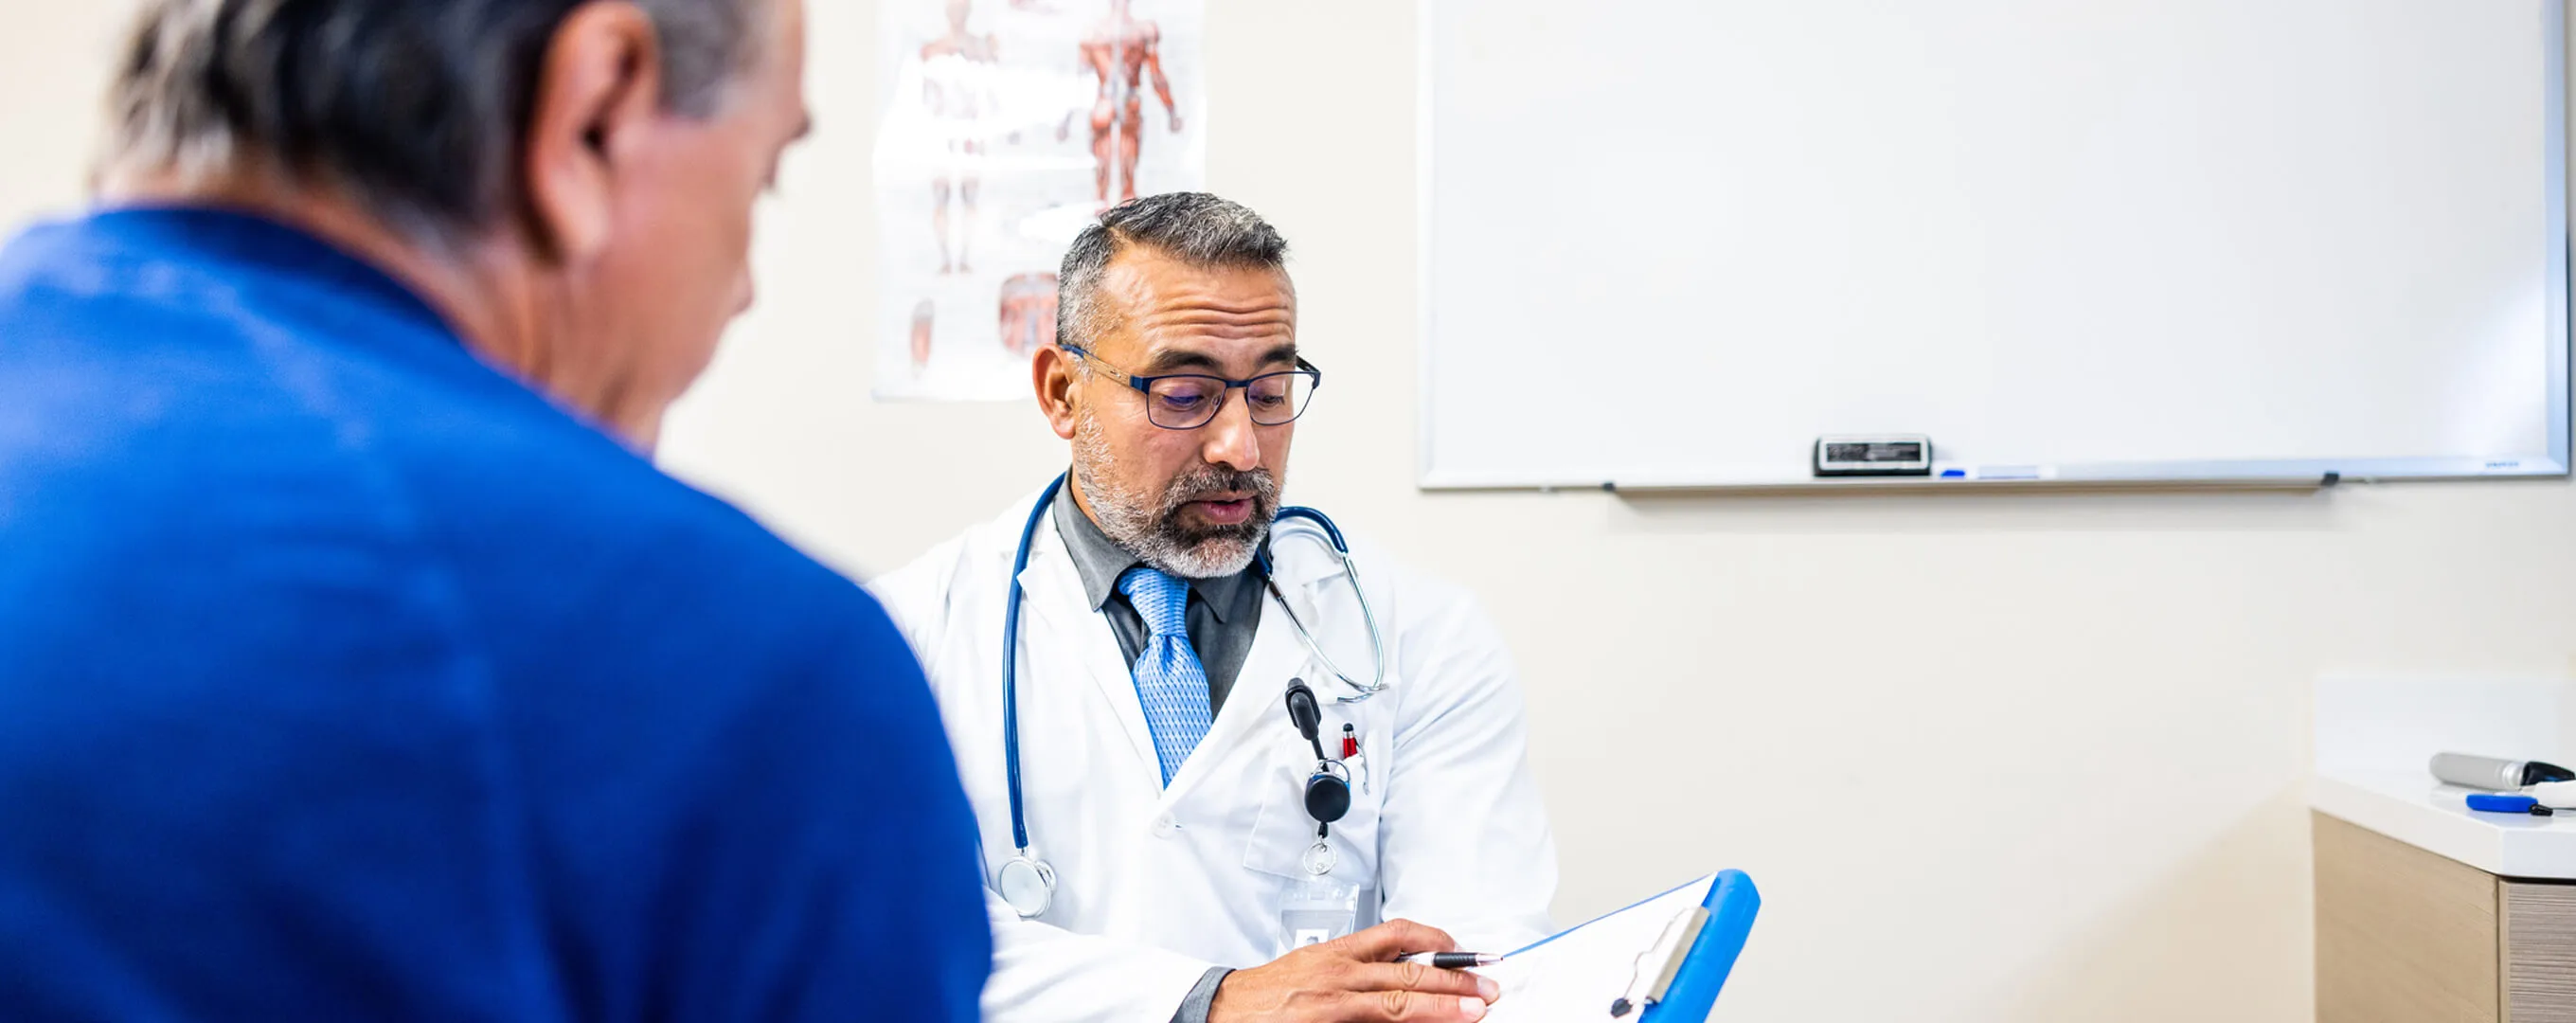 A doctor holds a clipboard with documents and talks to a patient.